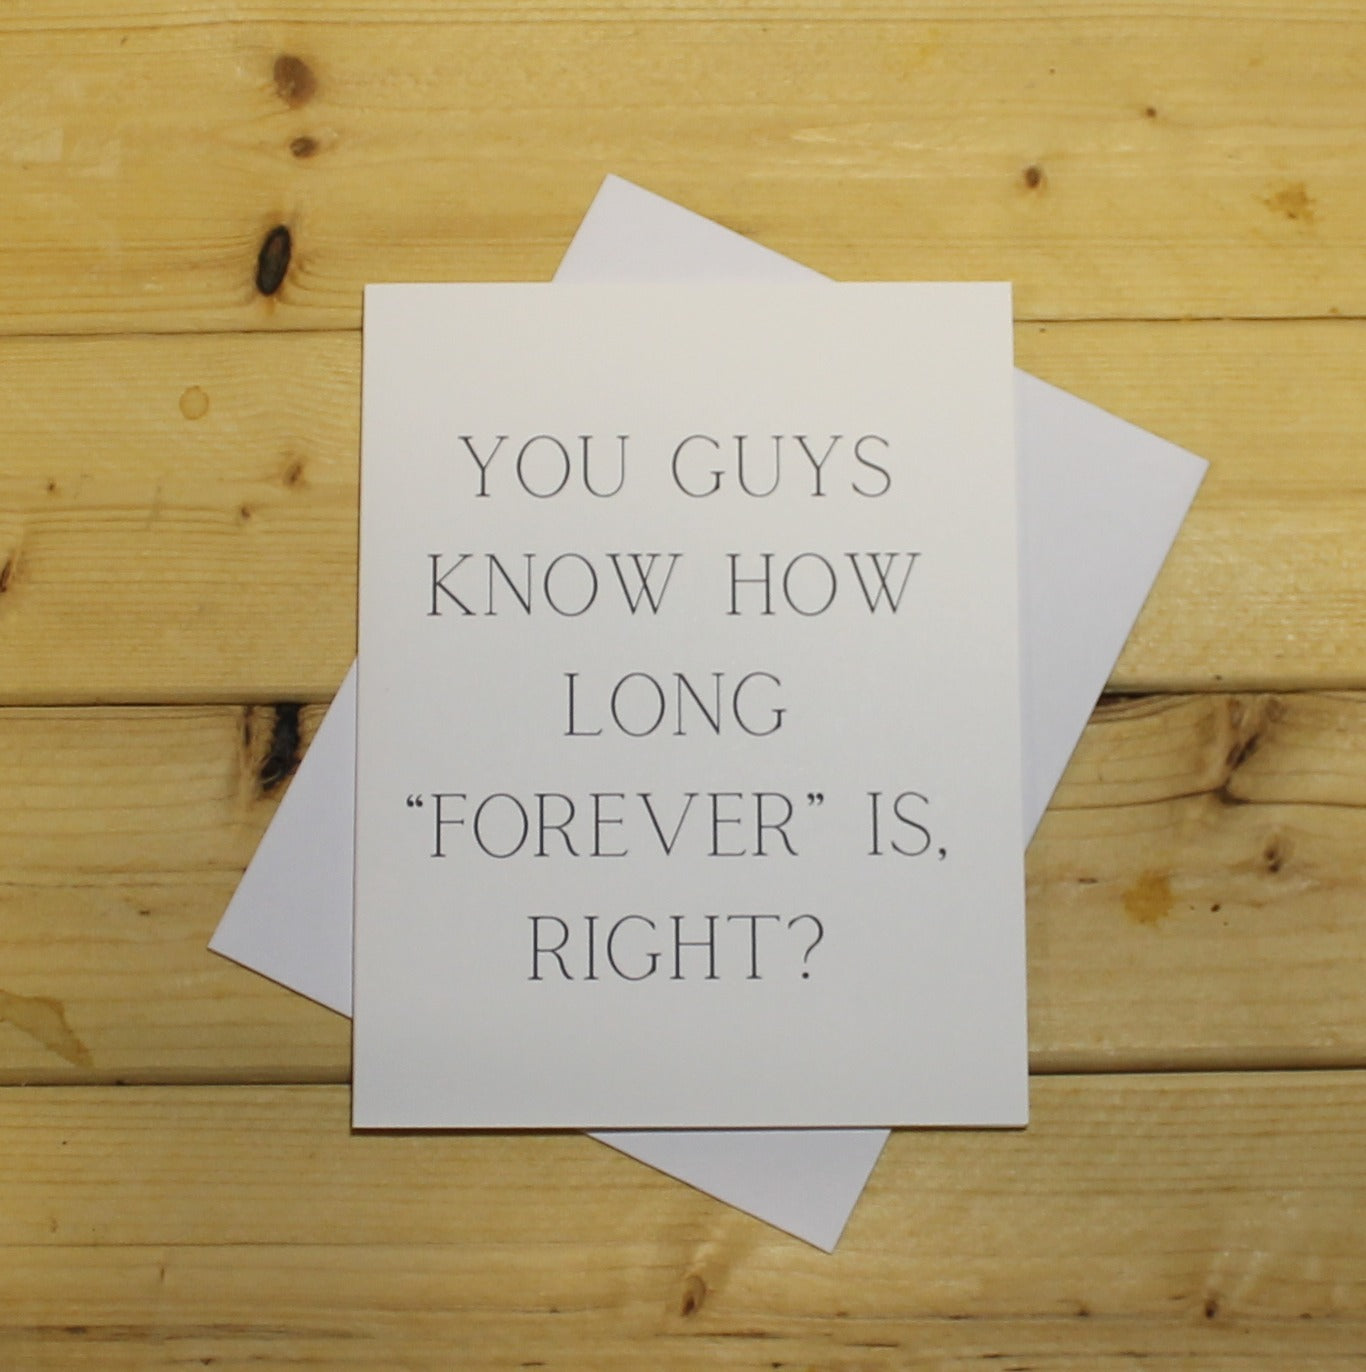 Funny Wedding Card: "You guys know how long 'forever' is, right?"